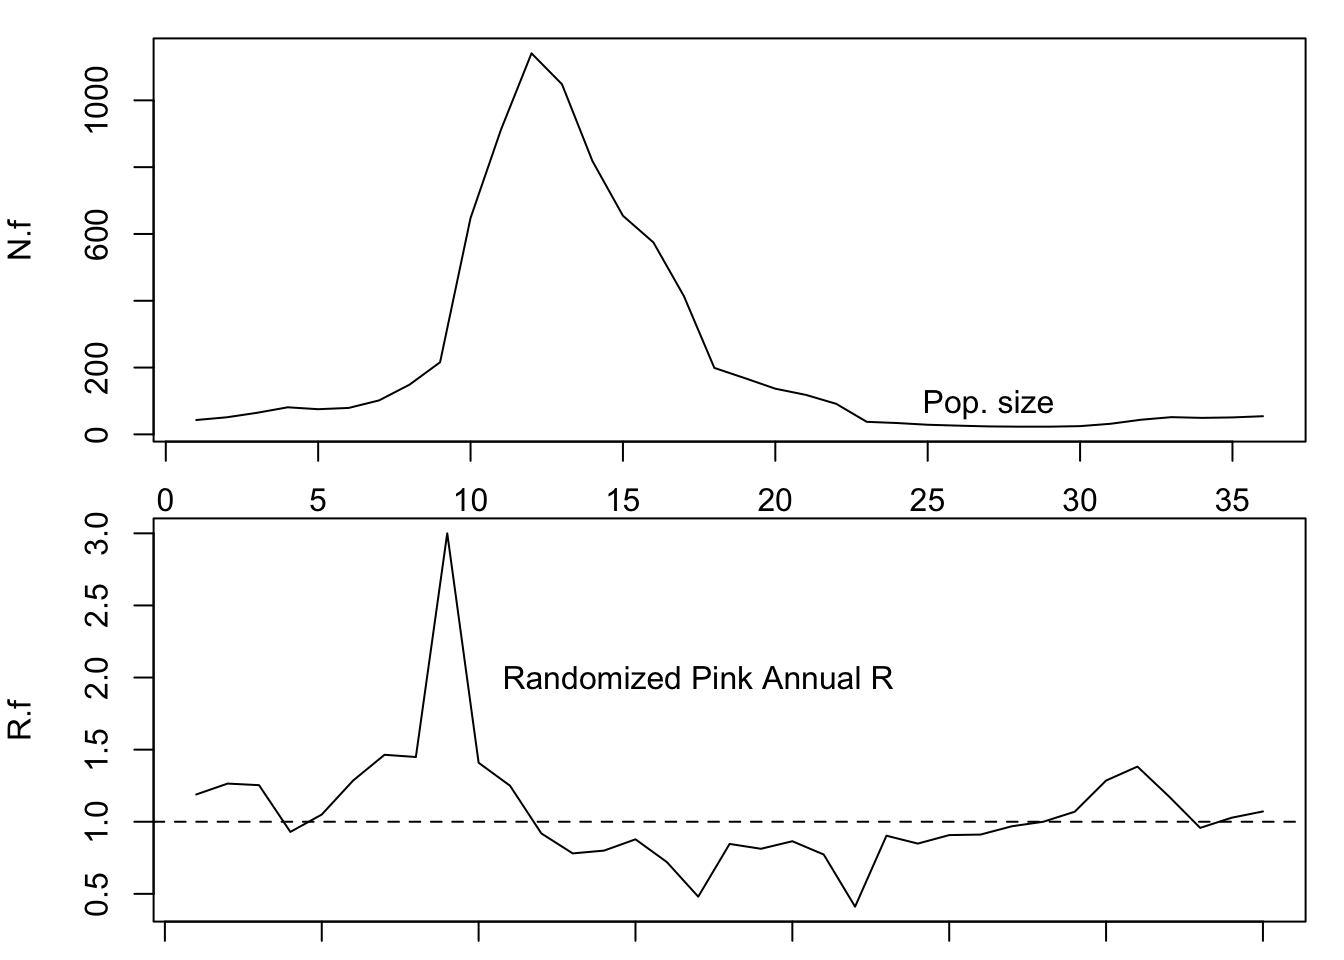 Example of a simulated sparrow projection using reddened annual growth rates.